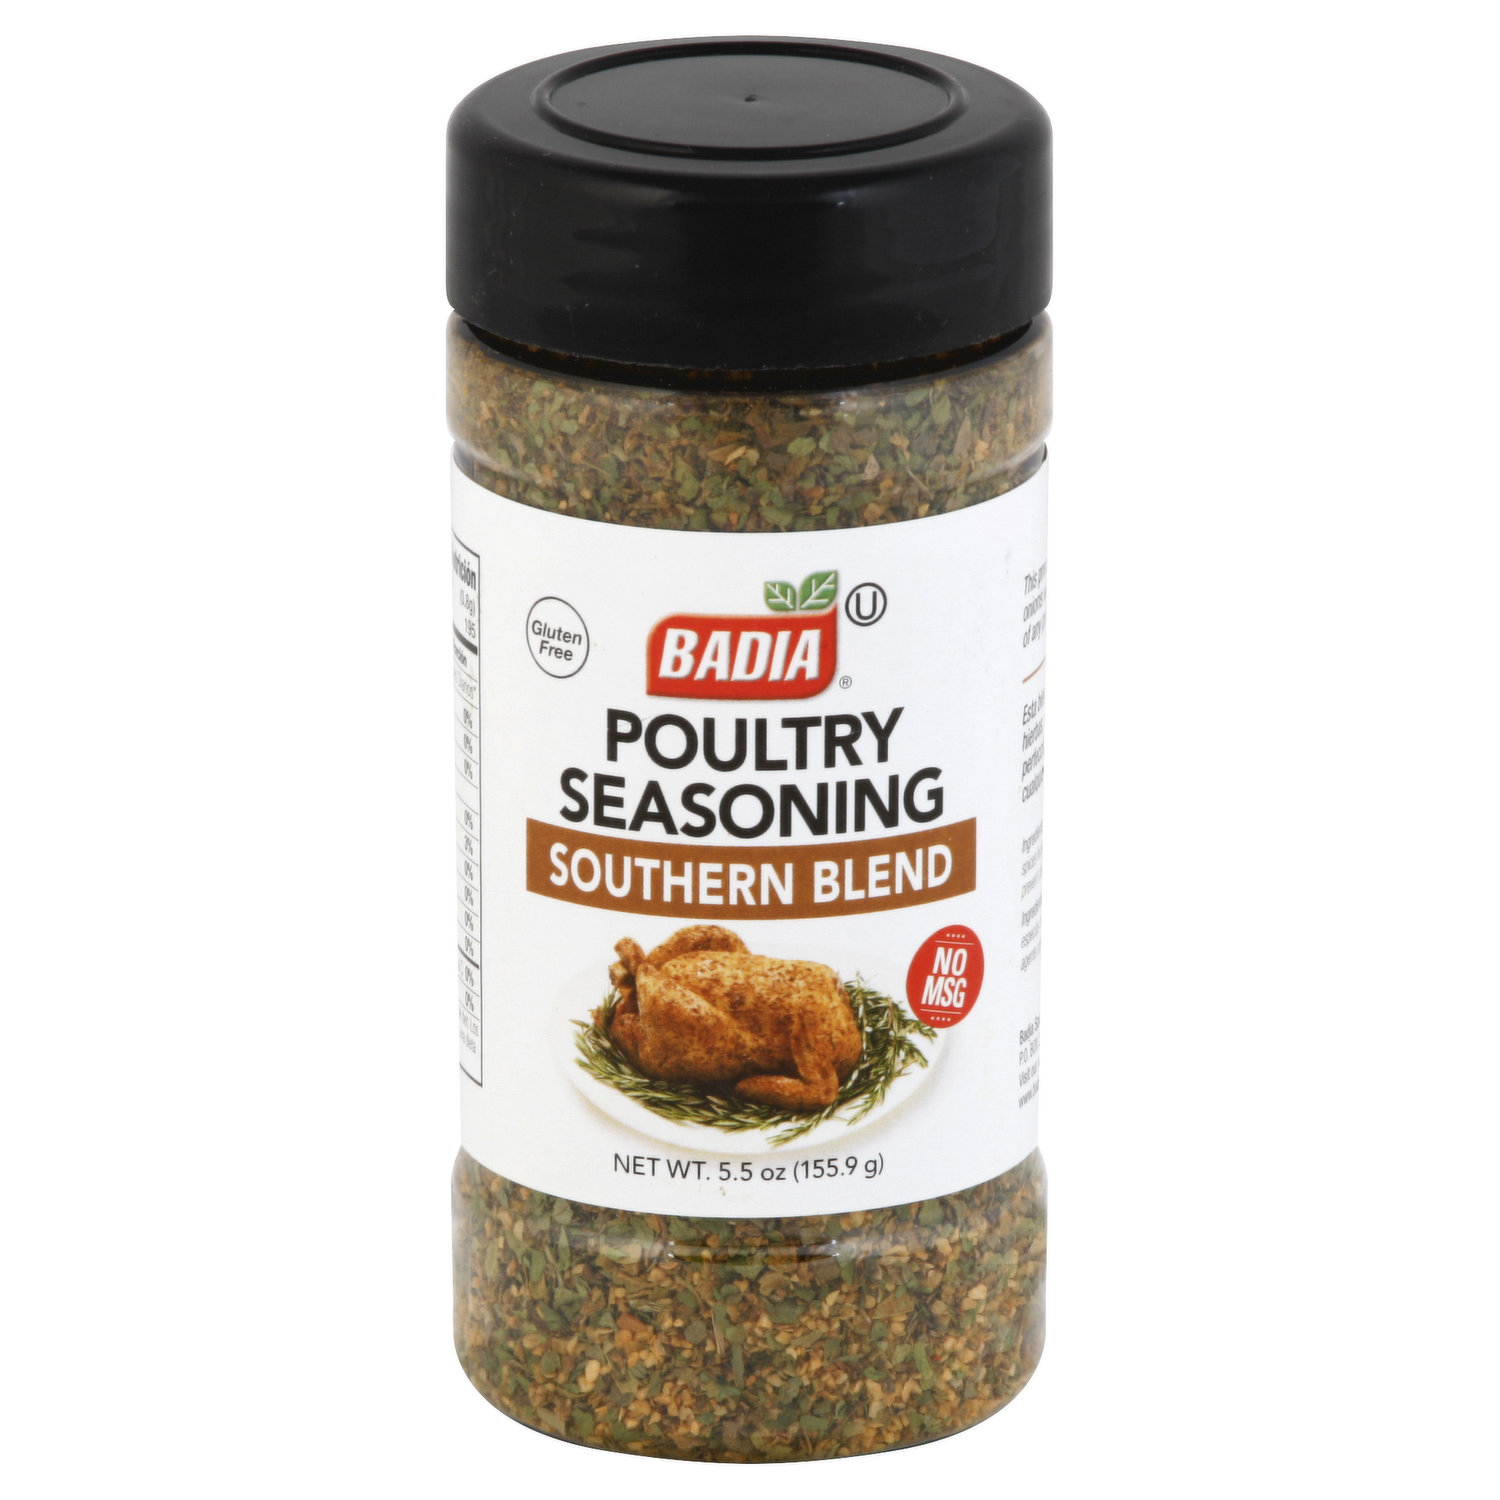 Poultry Seasoning Southern Blend - 5.5 oz - Badia Spices